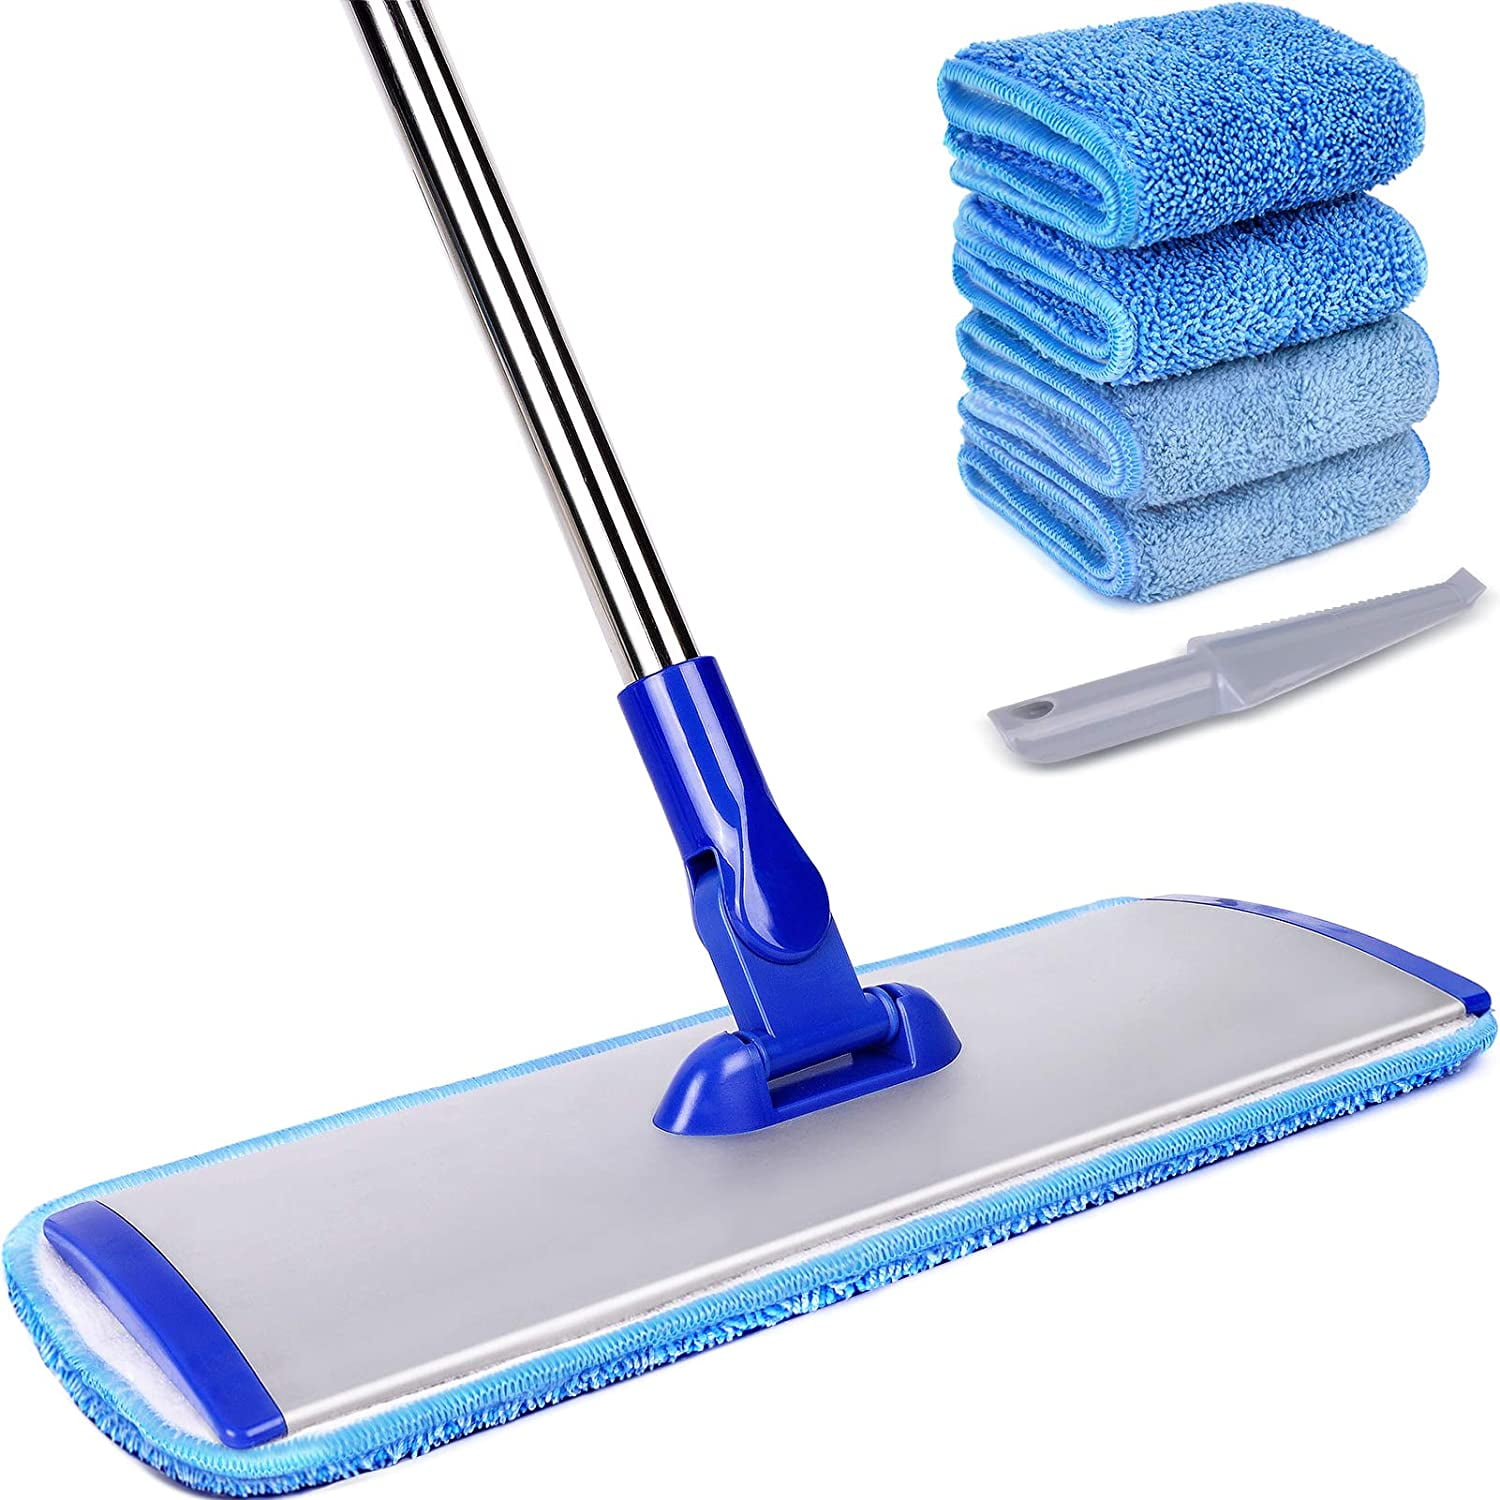 HOMTOYOU Microfiber Hardwood Floor Mop with 4 Washable Pads 360 Rotation Dust Flat Mop with Ultra Long Stainless Steel Handle for Home/Office Floor